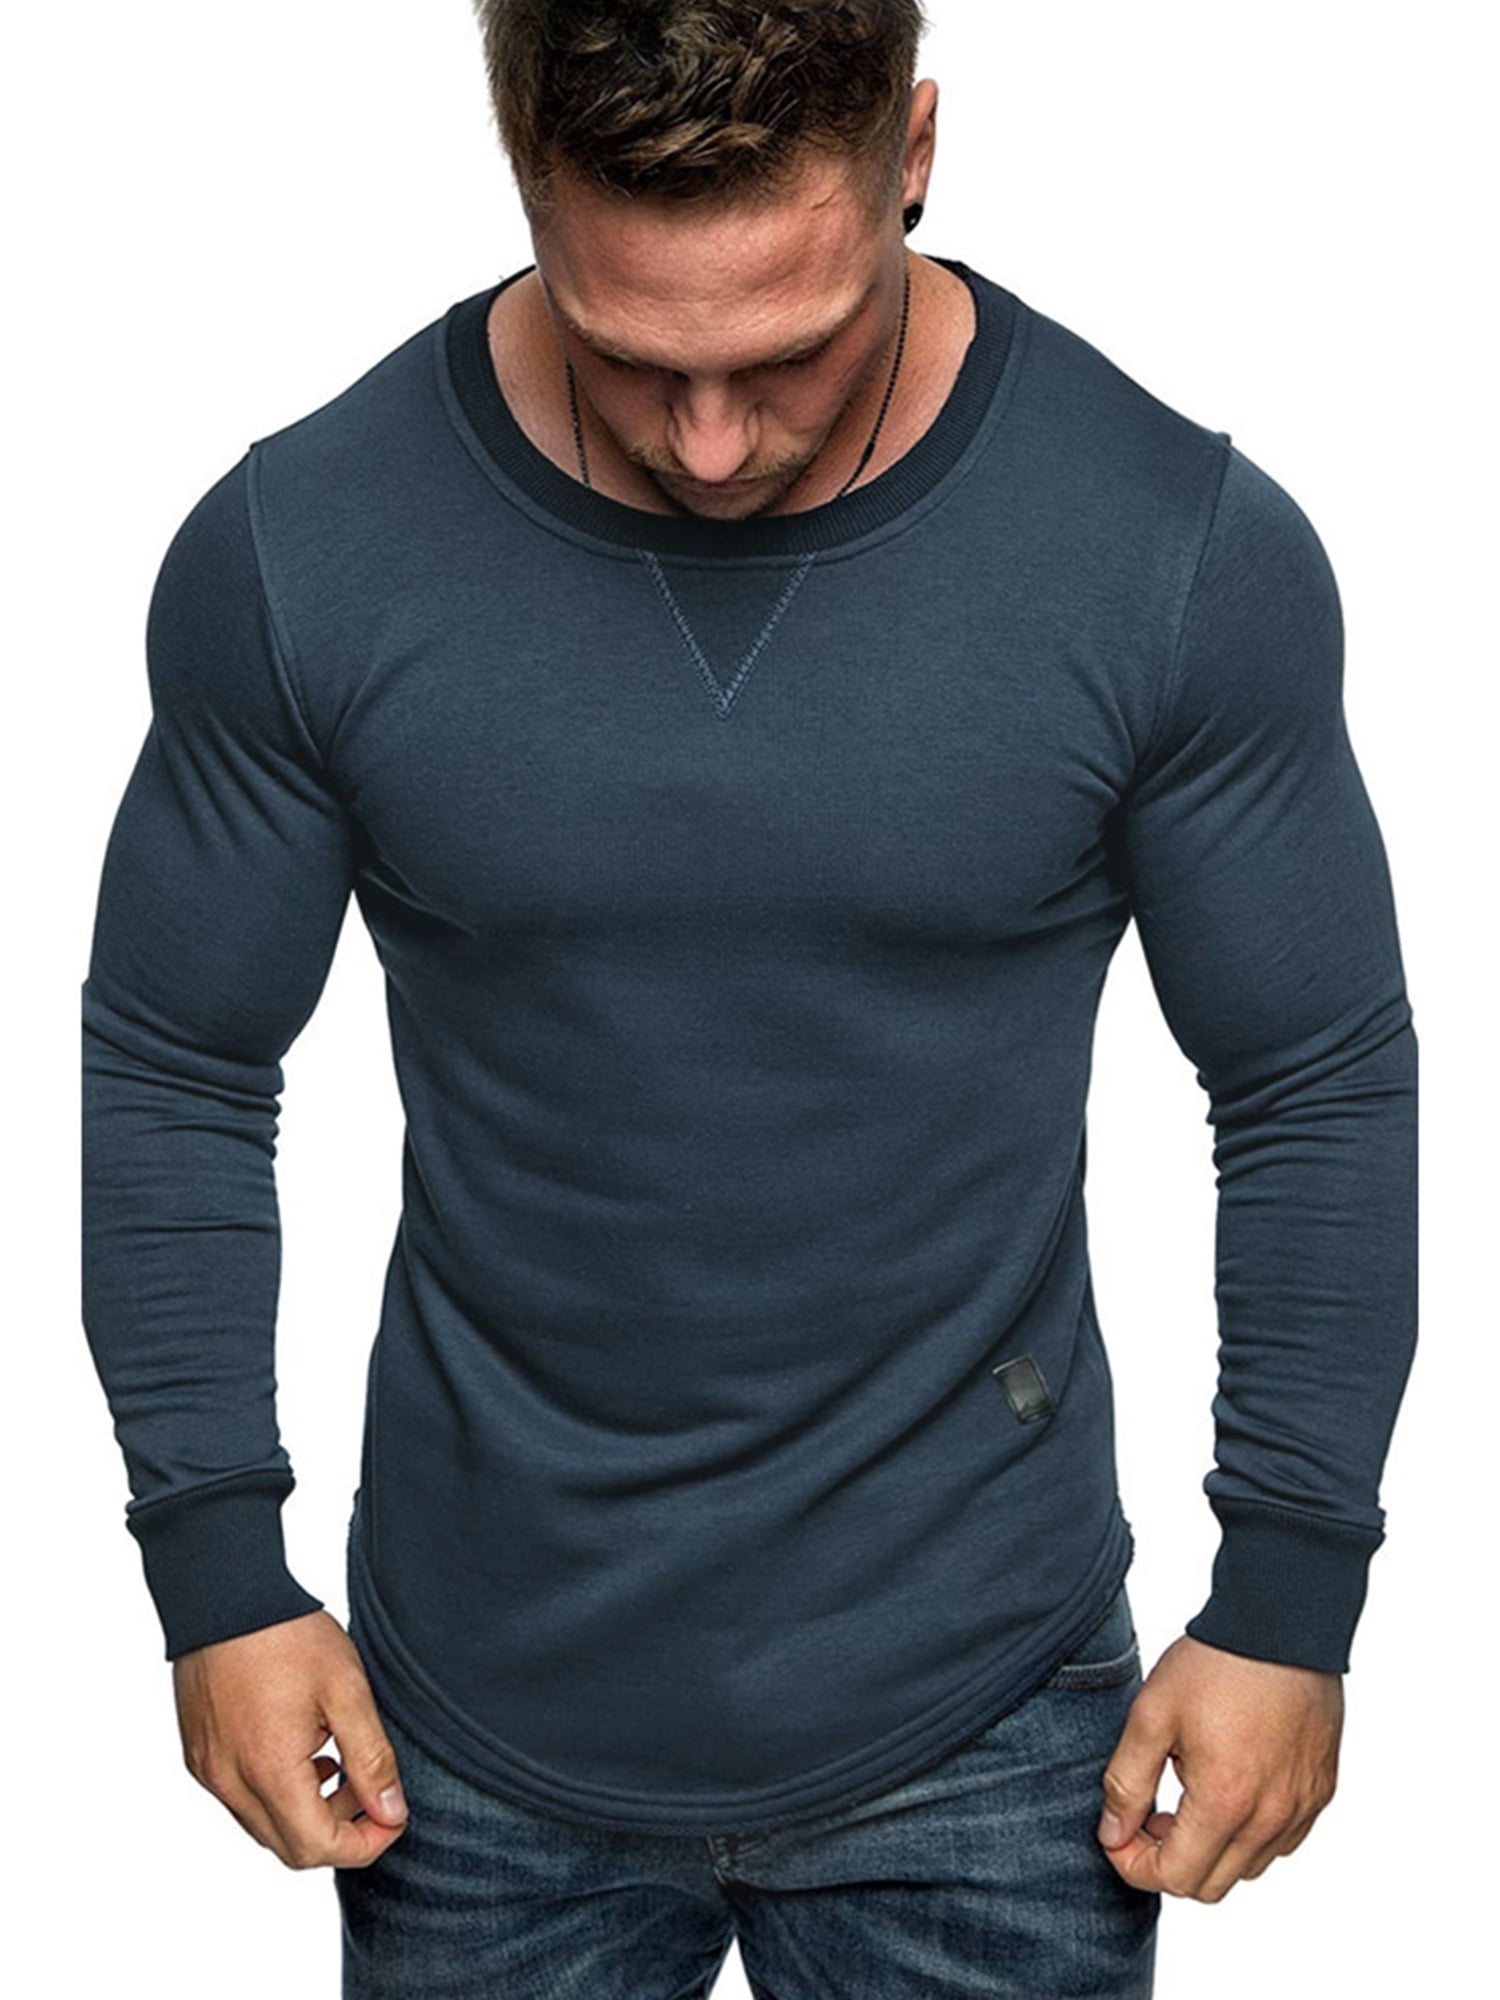 Wodstyle - Mens Muscle Long Sleeve T-Shirt Gym Sports Casual Plain Slim ...